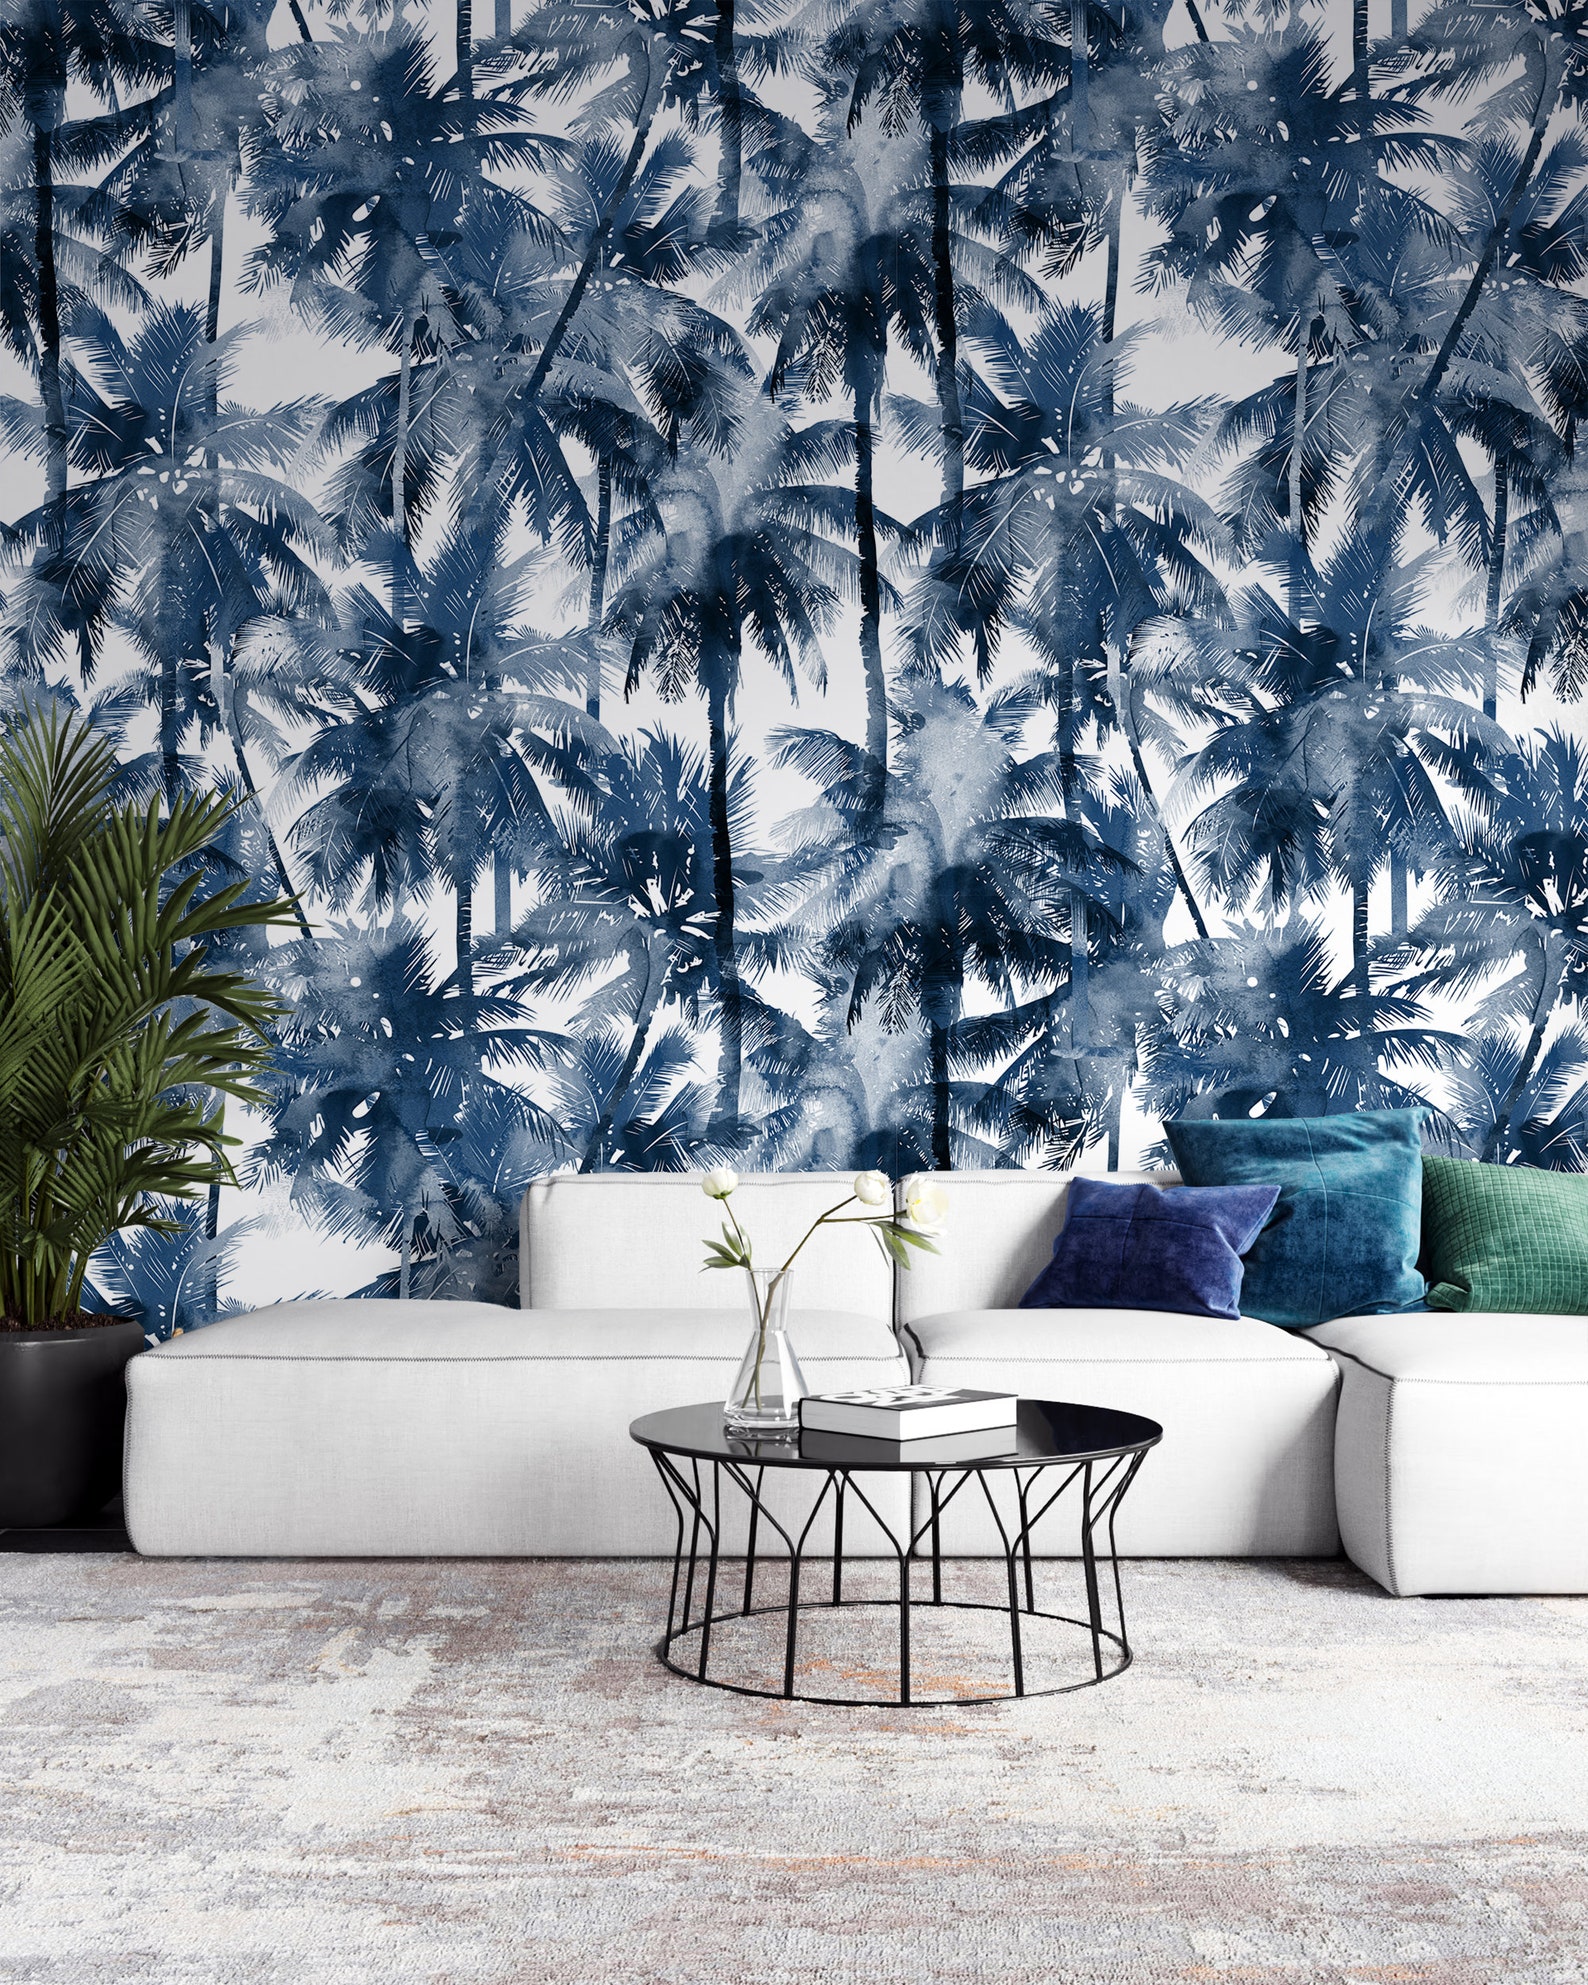 Peel And Stick Wallpaper with Palms Nature Wallpaper for Home | Etsy